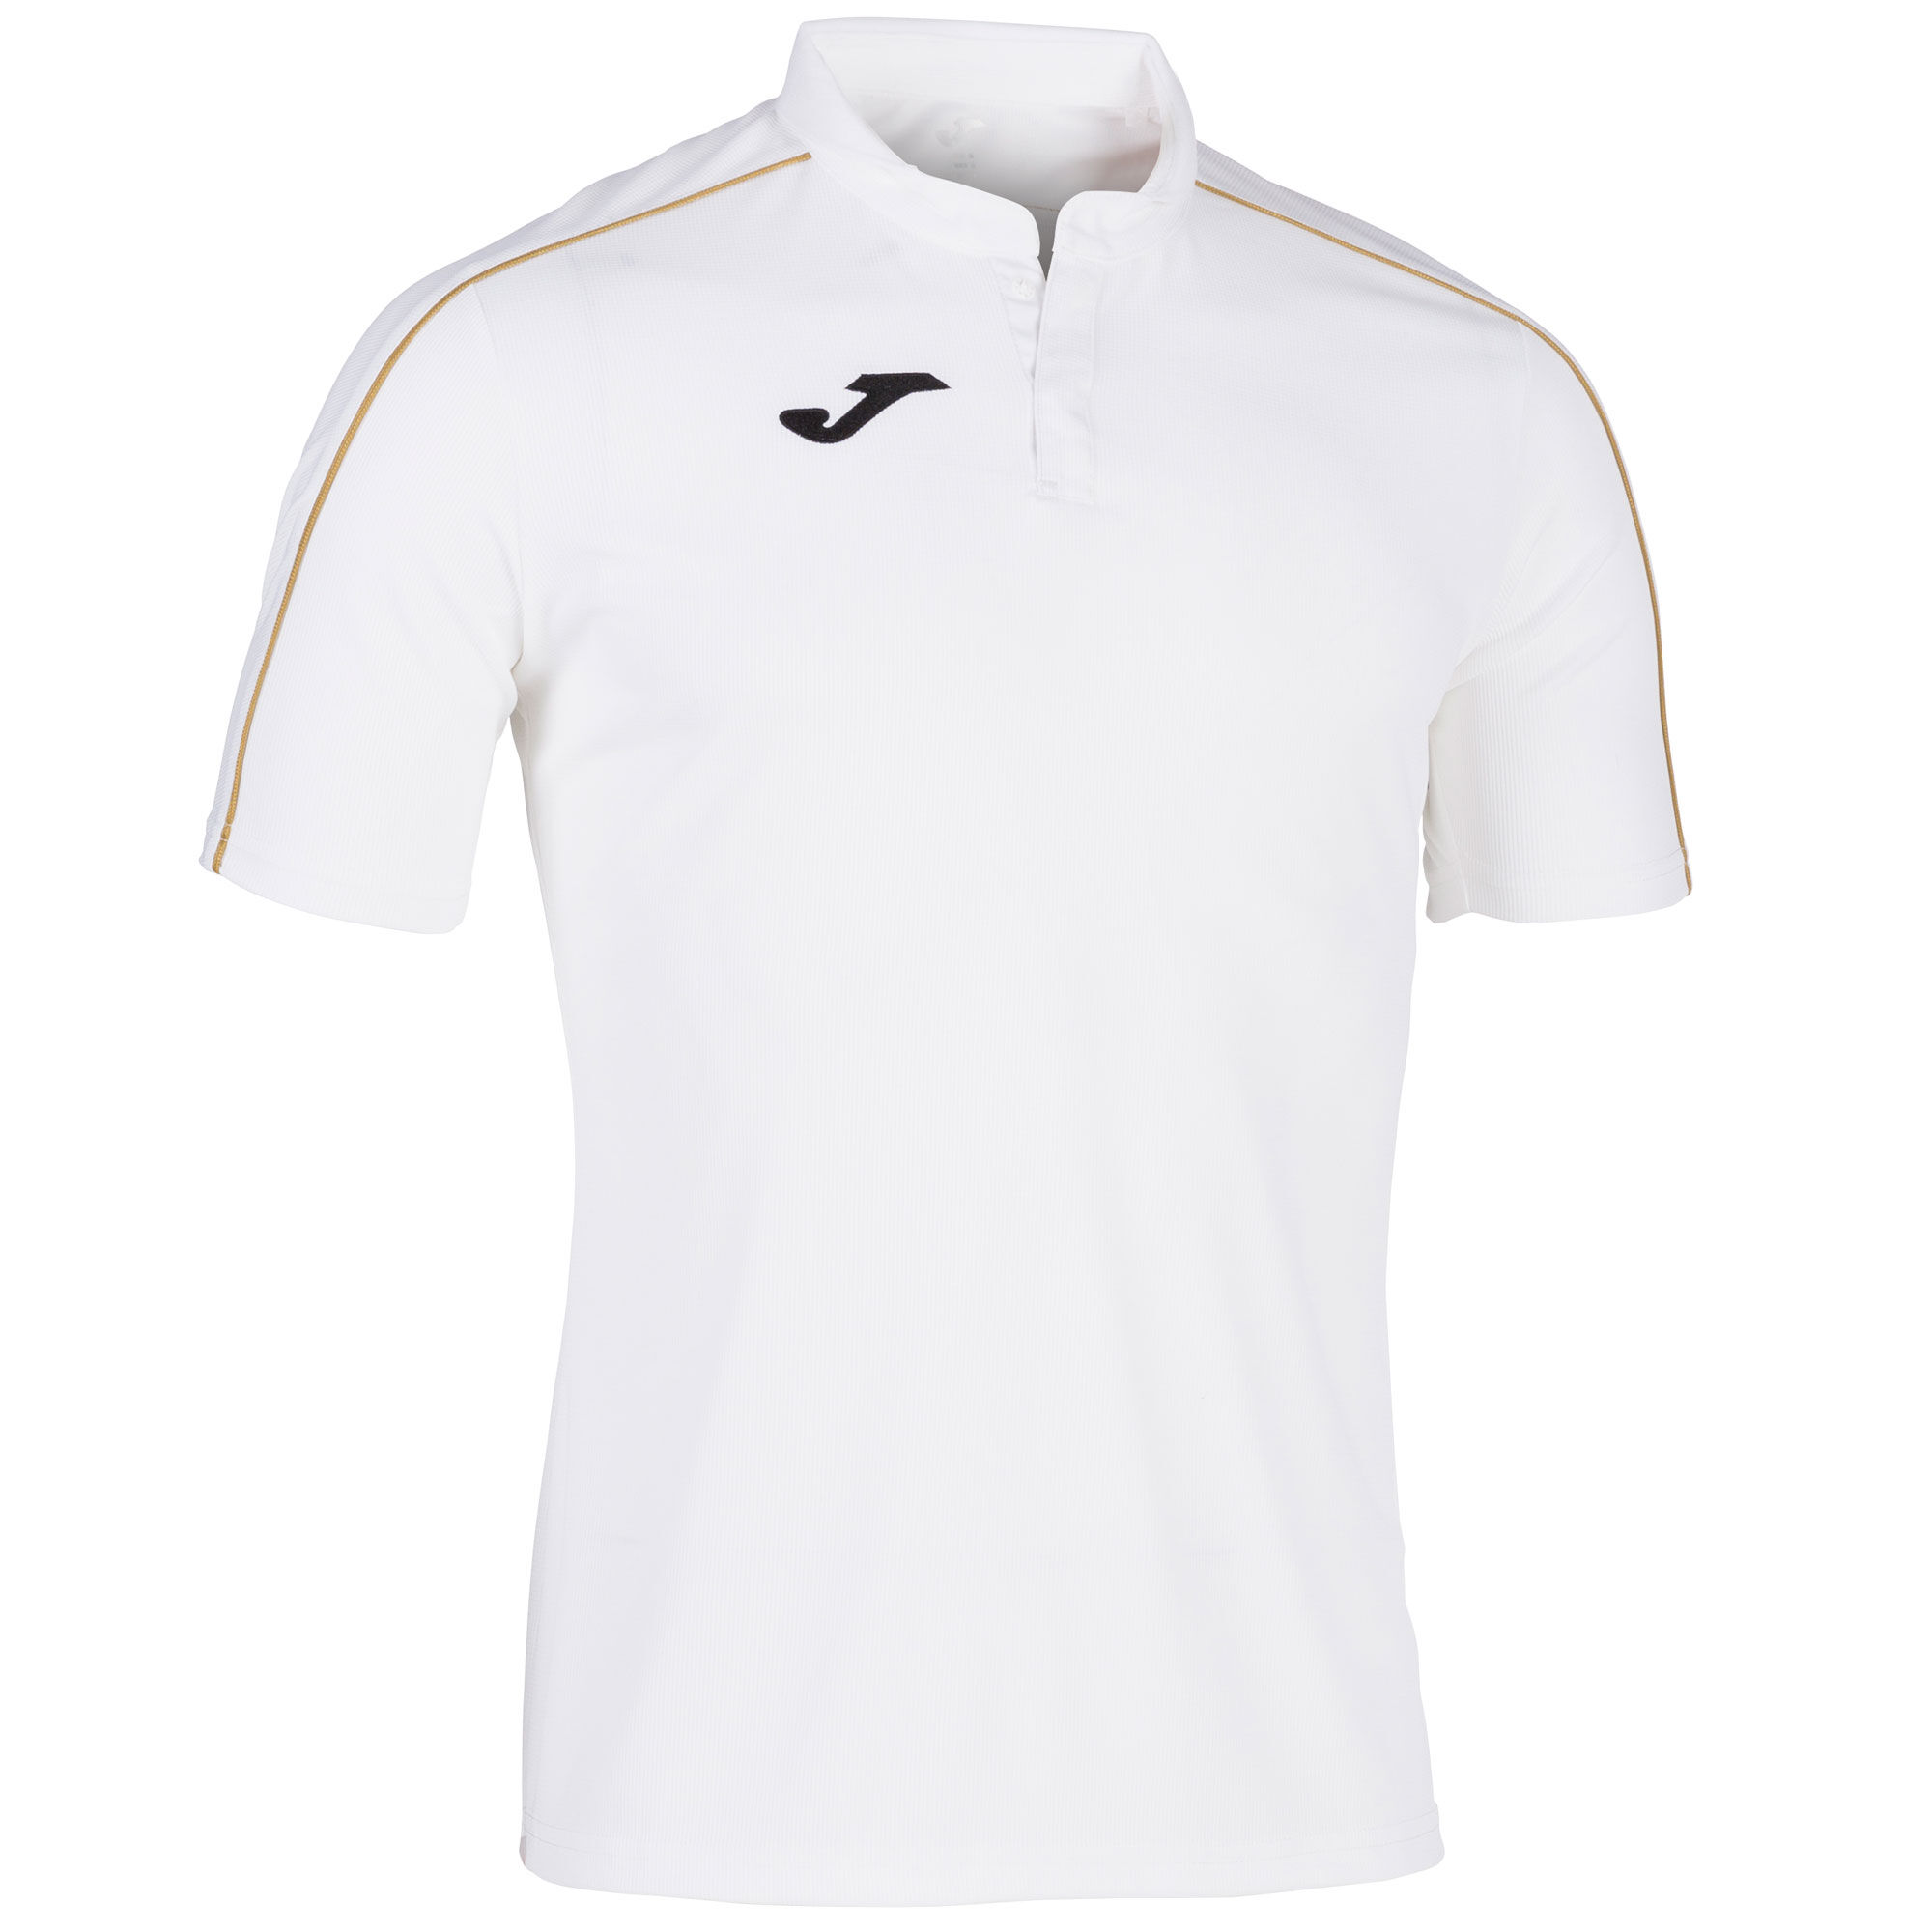 MAILLOT MANCHES COURTES HOMME GOLD BLANC